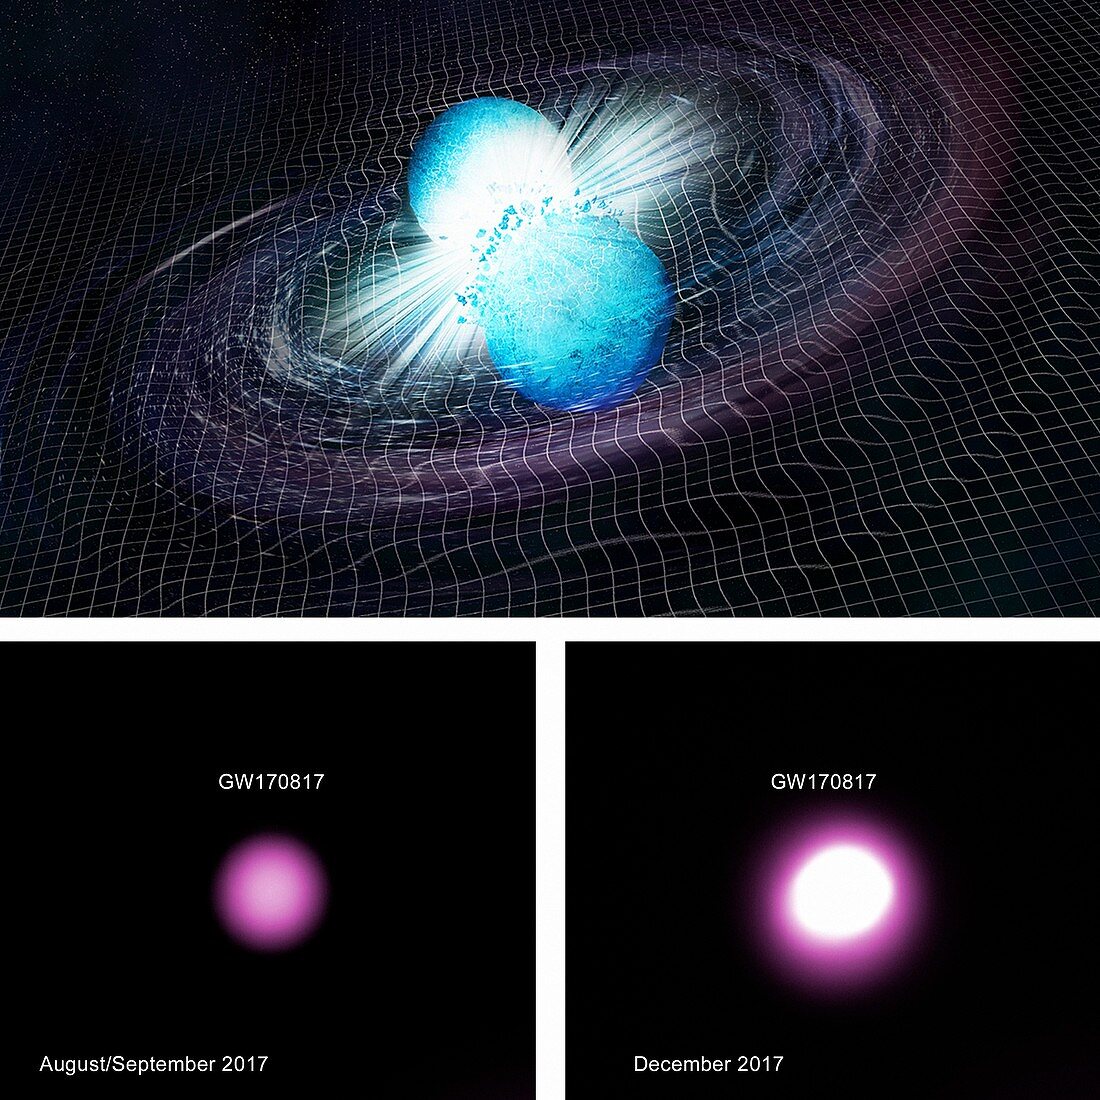 Neutron star merger, illustration and X-ray images